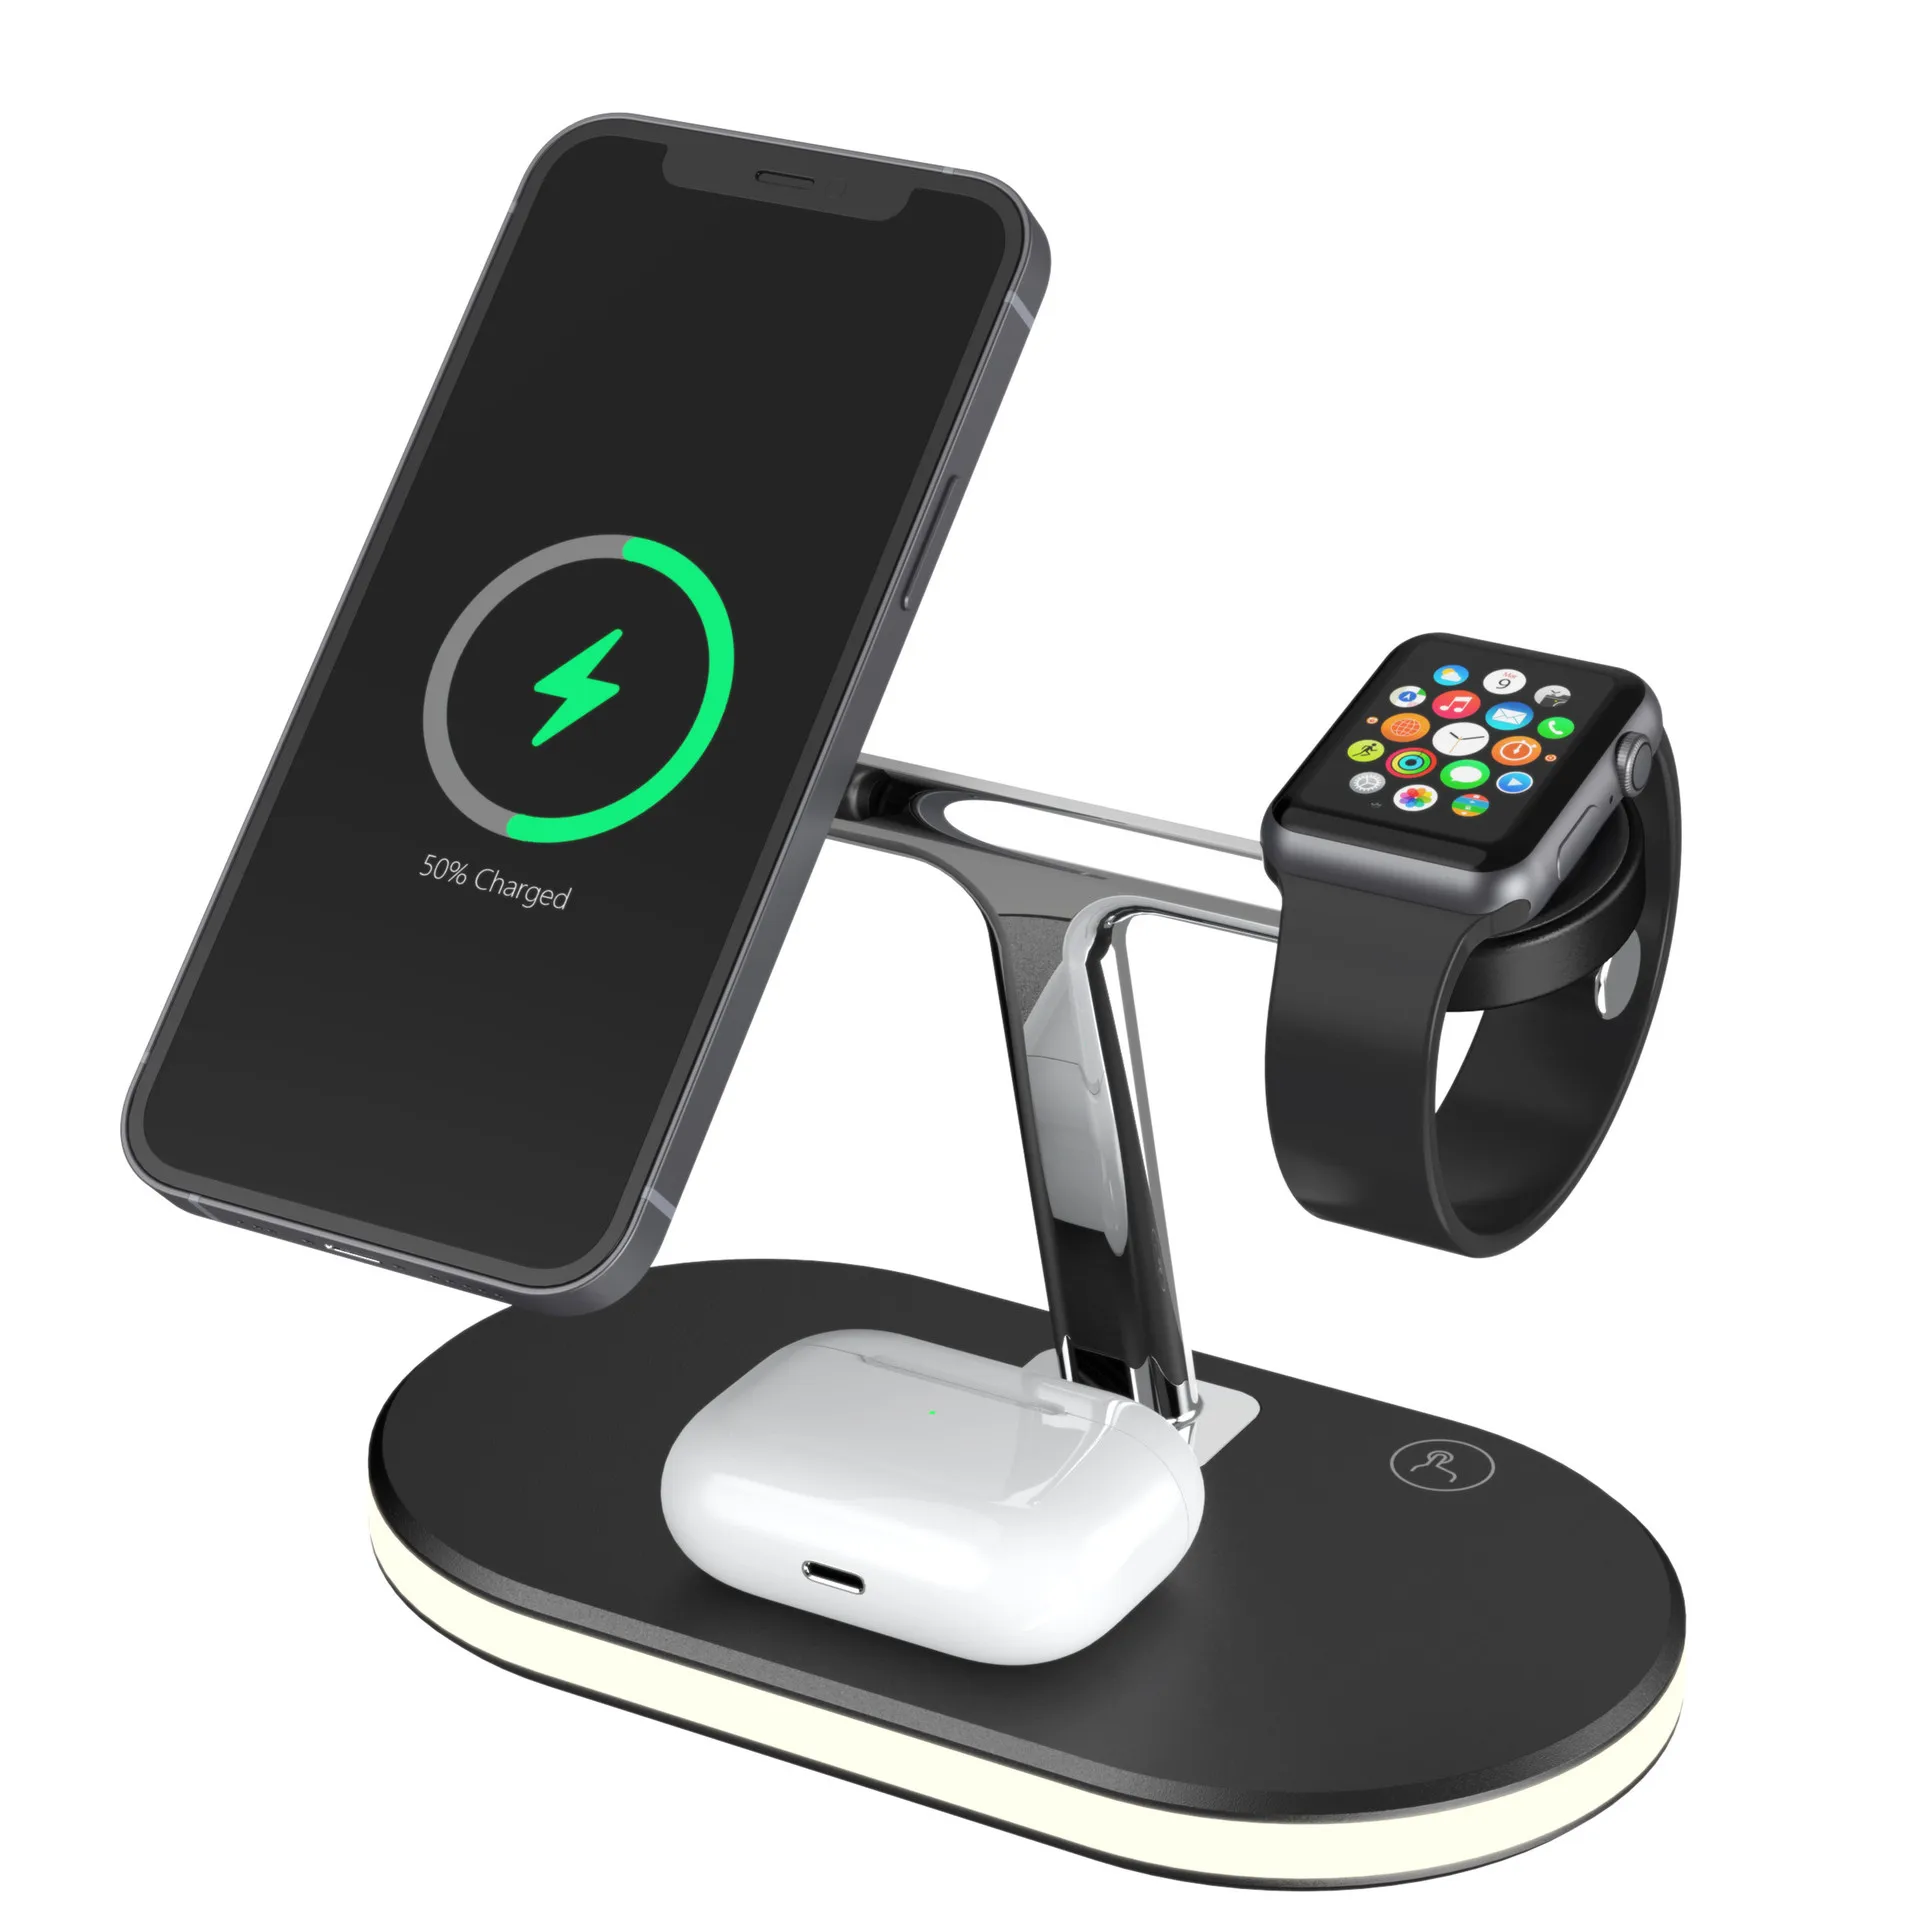 HOJIWI 3 In 1 Magnetic Fast Wireless Charger For IPhone 12 Wireless Charging Dock Stand 15W For Apple Watch AirPods DA01